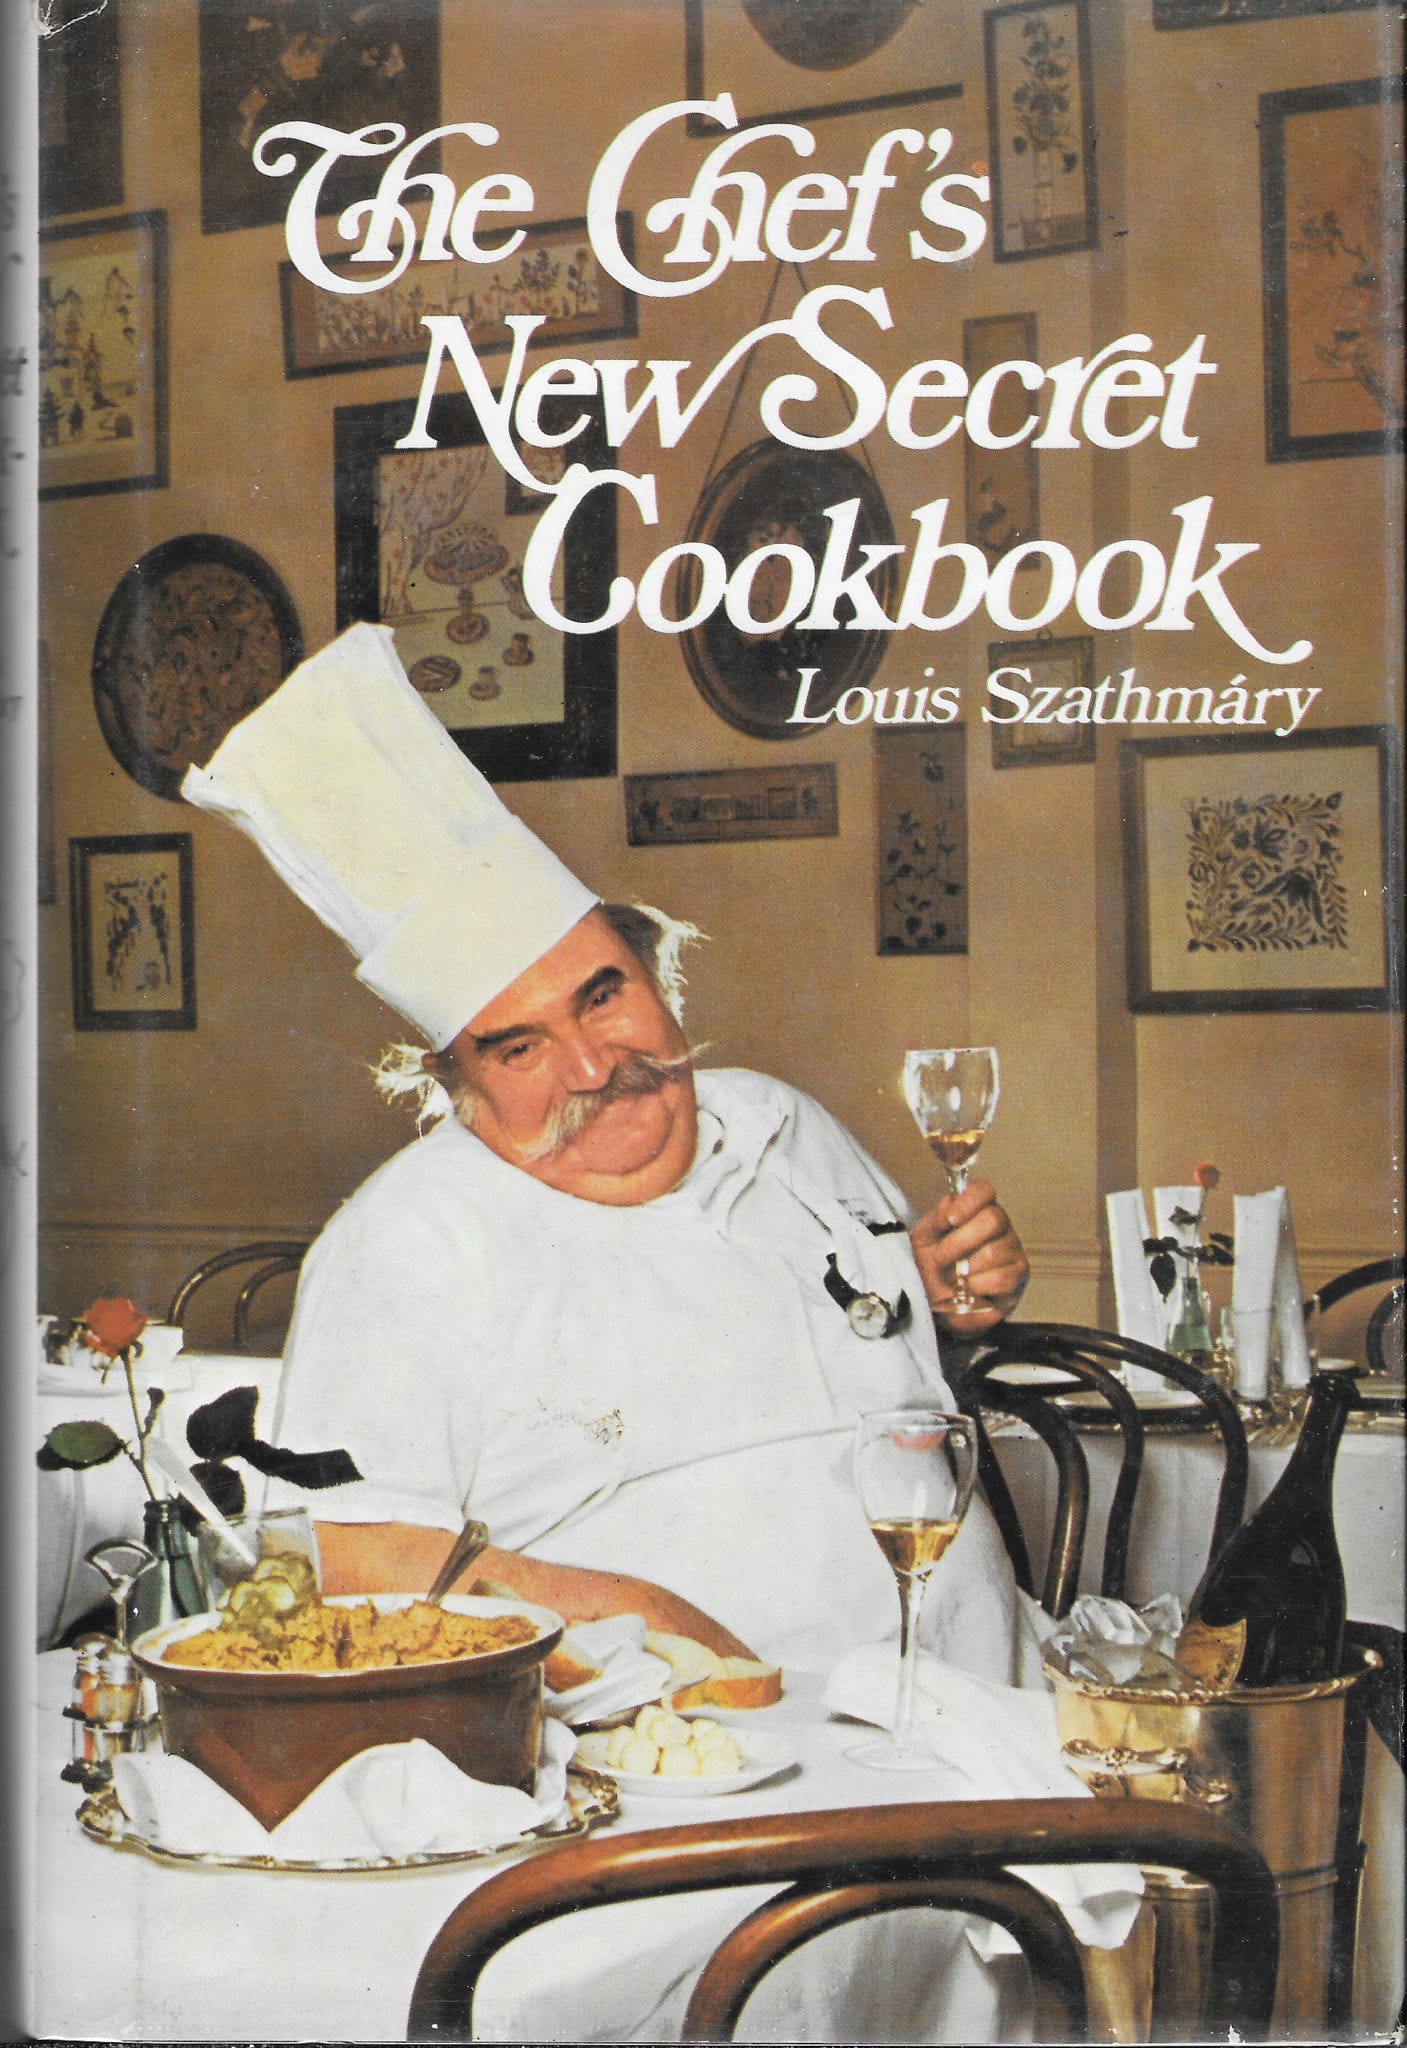 Chef&#39;s New Secret Cookbook, Louis Szathmary, 1975, in Mint Condition!